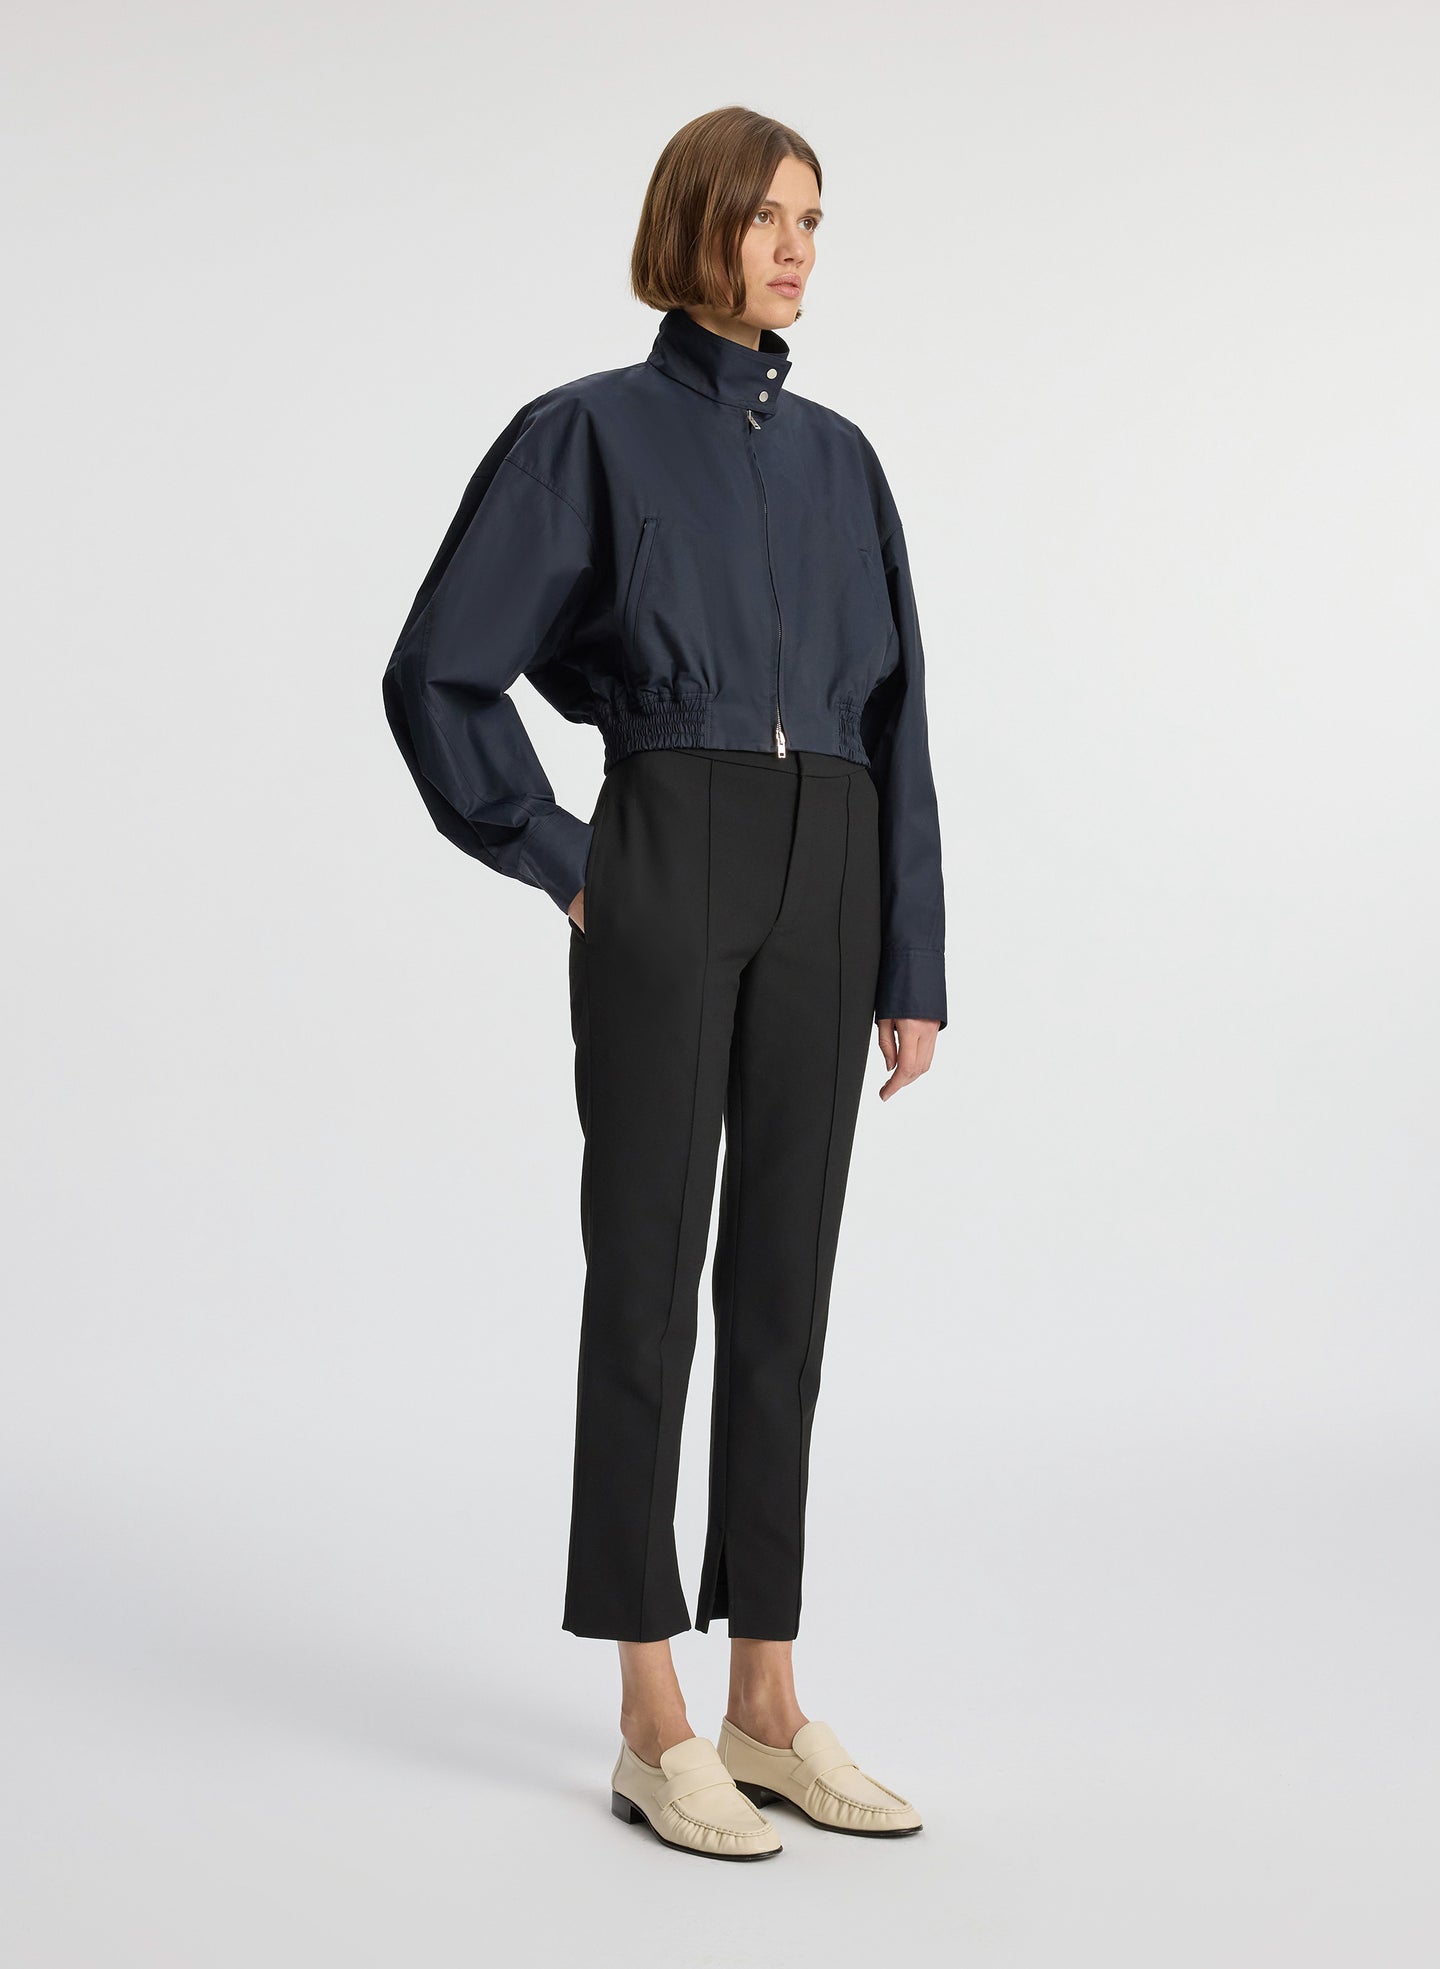 side view of woman in navy blue jacket and black ankle pants